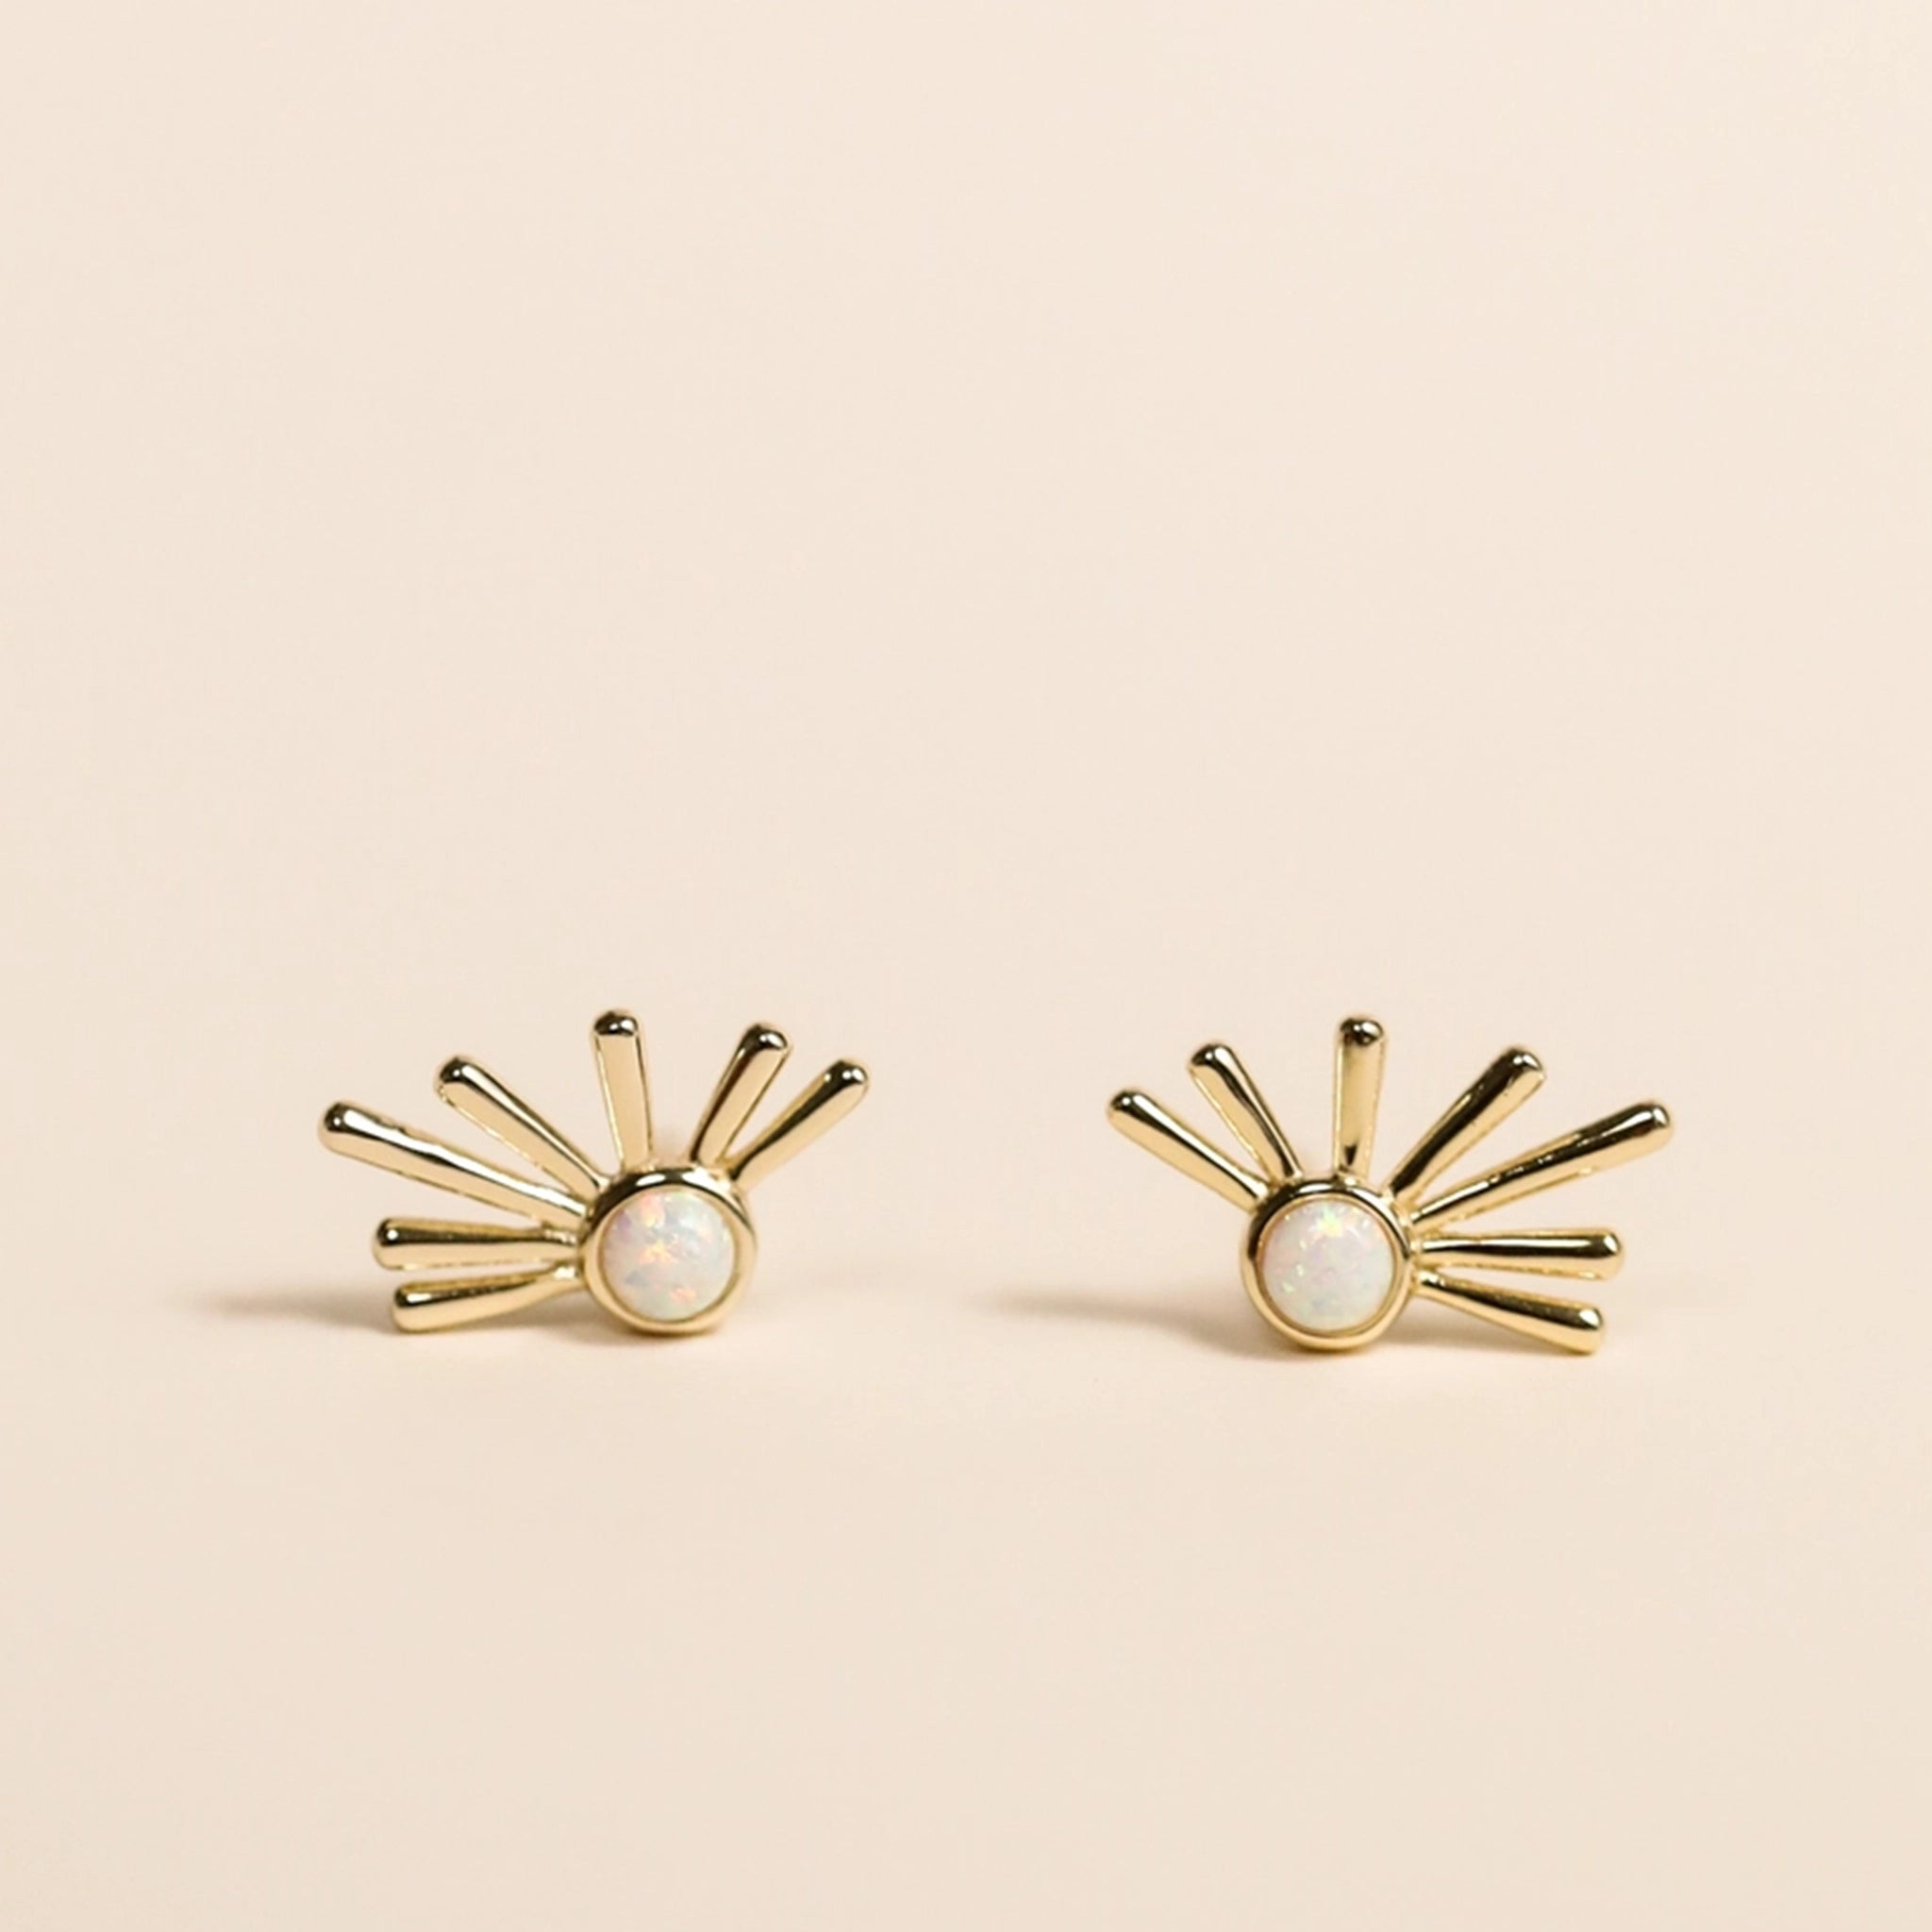 On a neutral background is a pair of gold and white opal stud earrings with a dainty sun ray shape with the white opal stone in the center. 